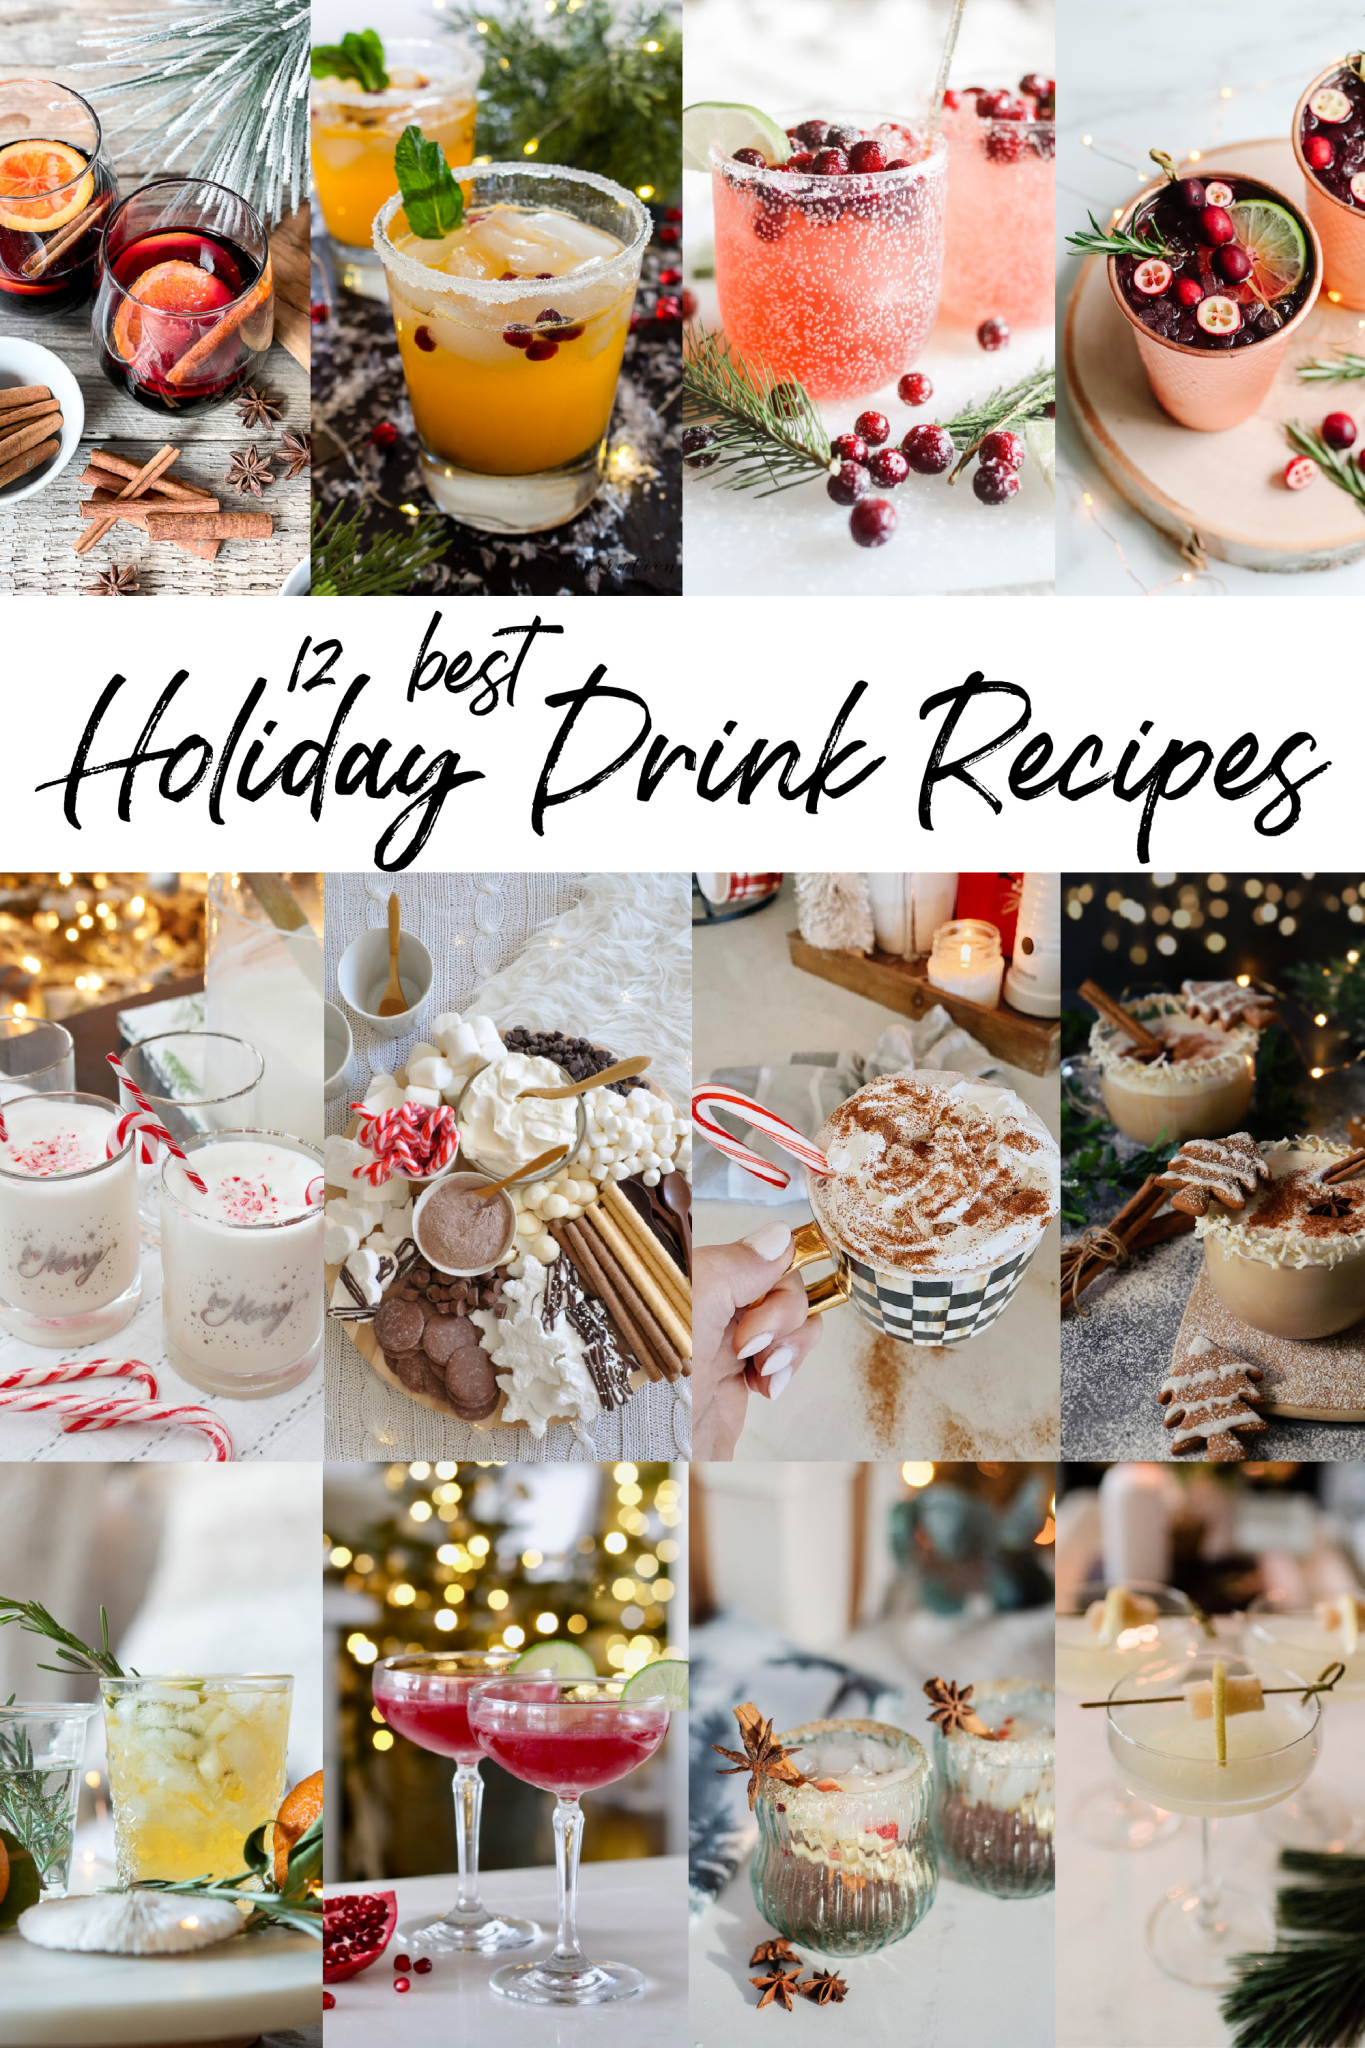 Christmas Cocktail Recipe: Cranberry Whiskey Mules via @modernglamhome